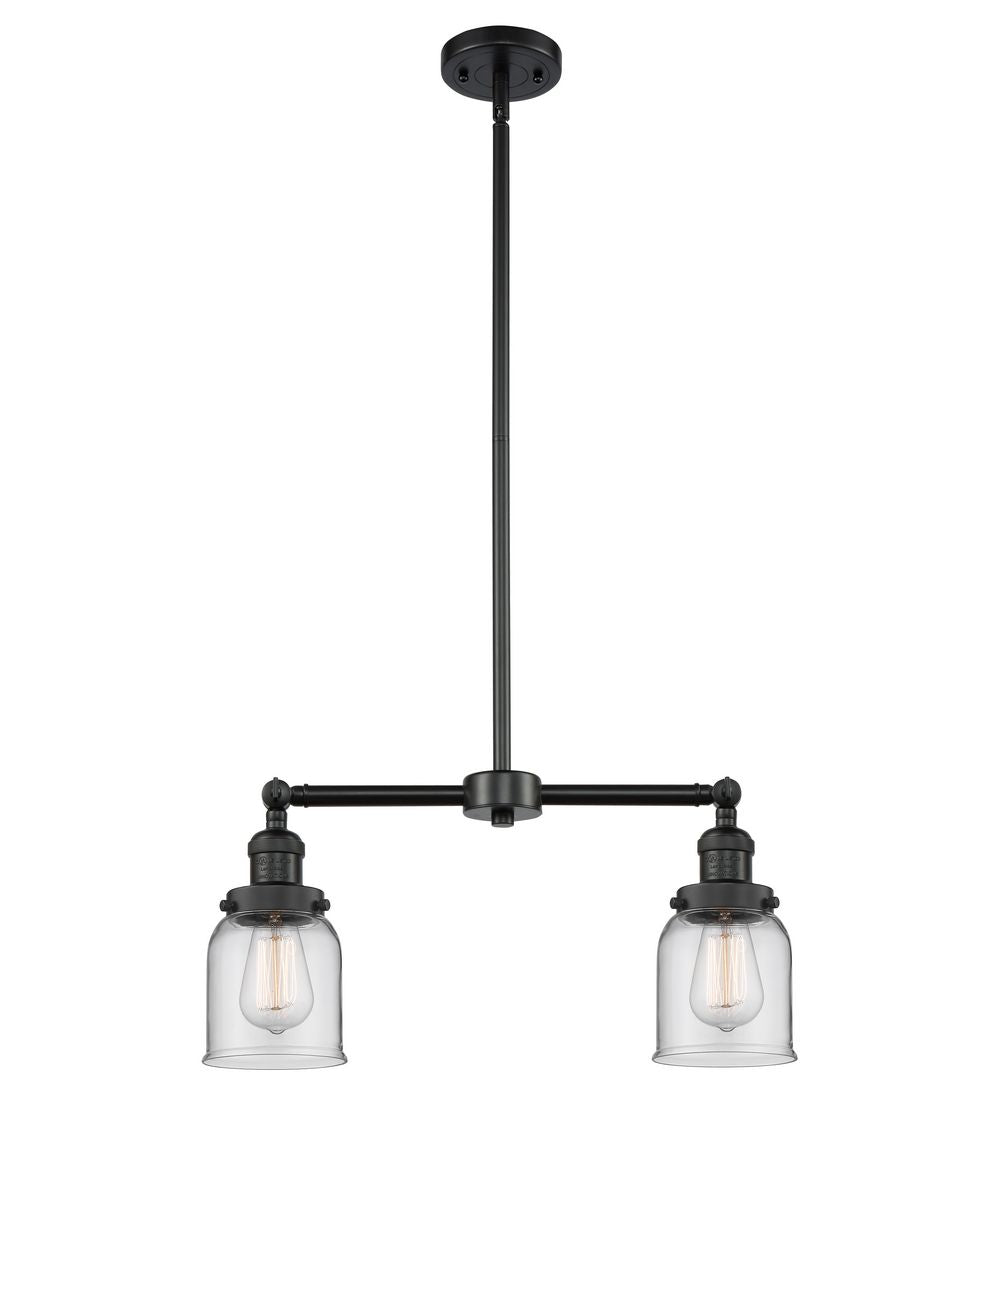 209-BK-G52 2-Light 21" Matte Black Island Light - Clear Small Bell Glass - LED Bulb - Dimmensions: 21 x 5 x 10<br>Minimum Height : 20.875<br>Maximum Height : 44.875 - Sloped Ceiling Compatible: Yes